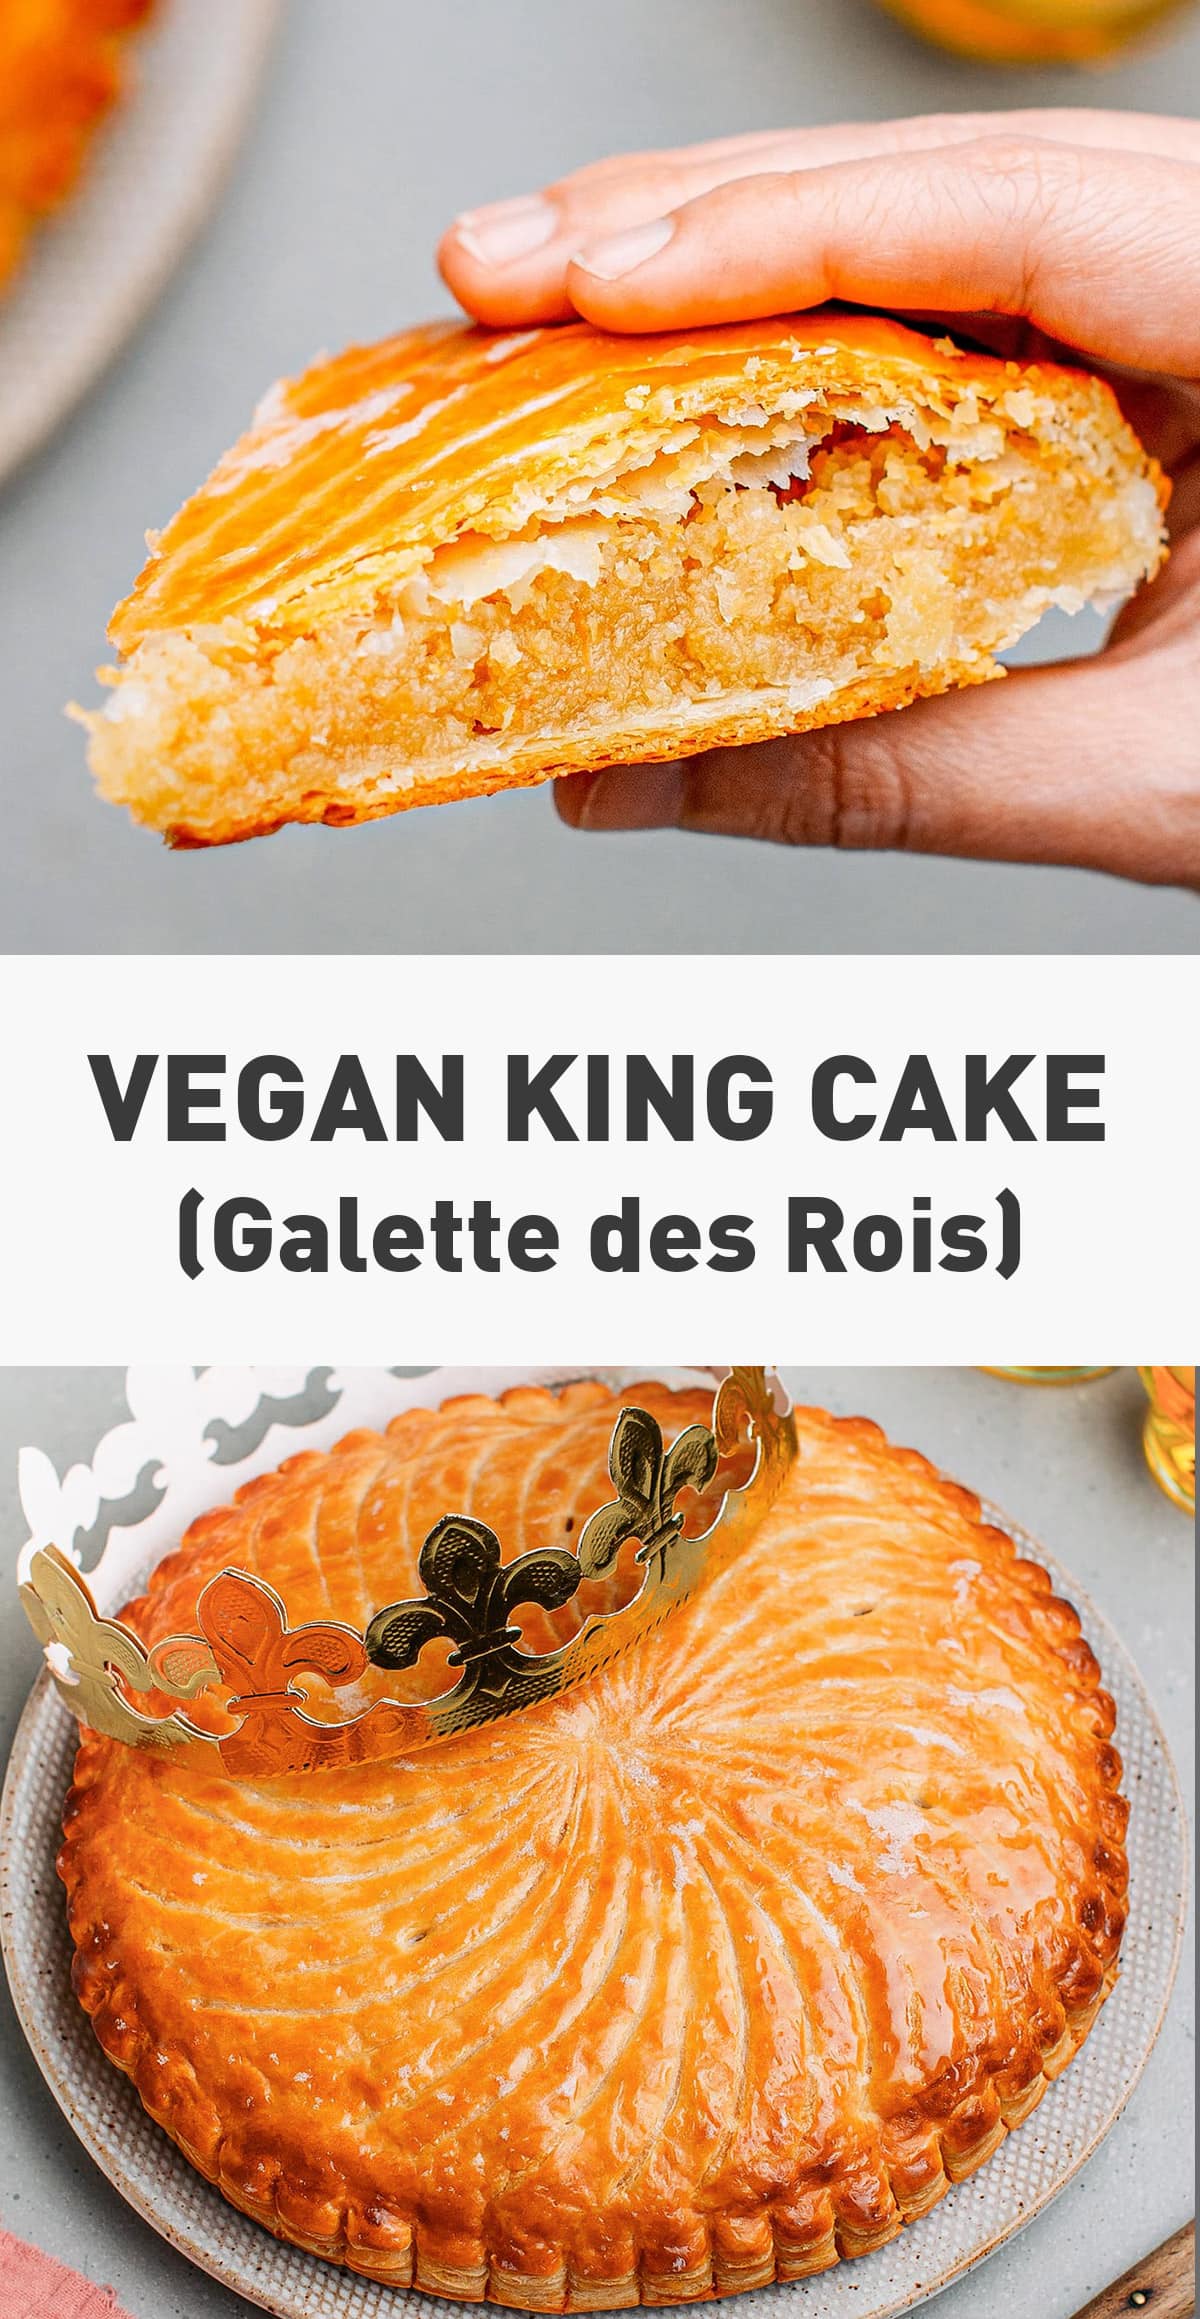 King cake, also known as "Galette des Rois," is a classic French pastry that consists of puff pastry filled with a sweet almond paste called frangipane. This vegan king cake tastes just as good as the original without the eggs! #vegan #baking